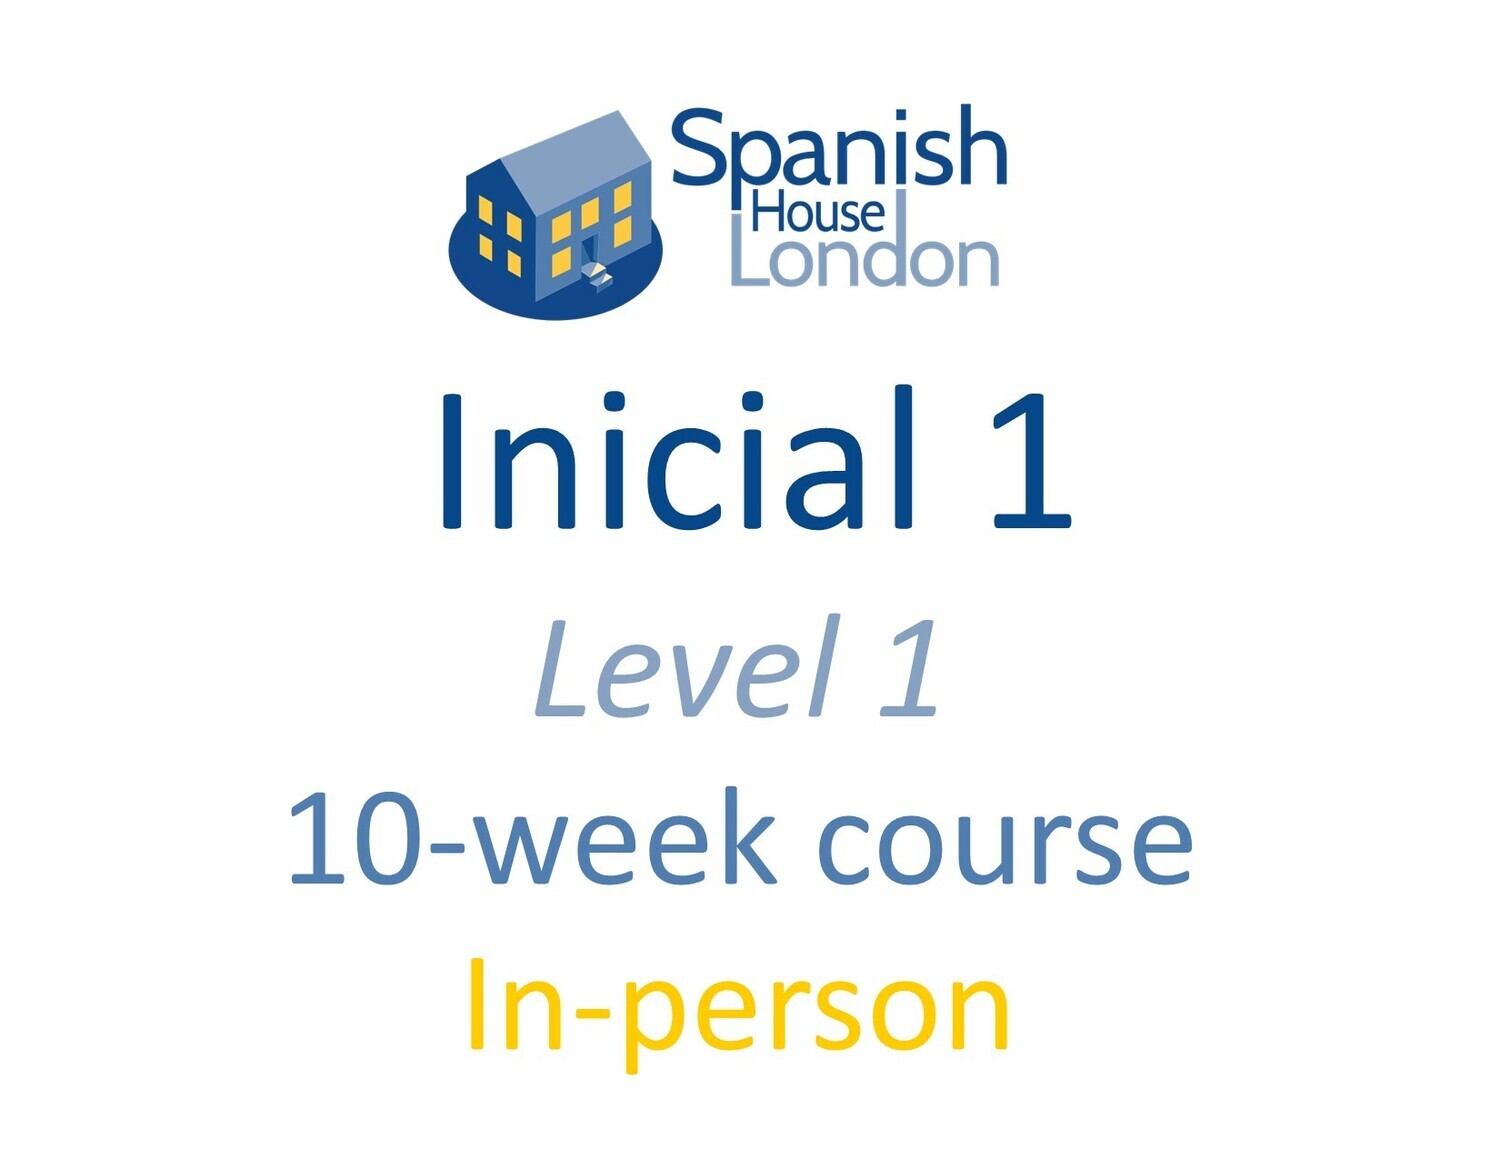 Inicial 1 Course starting on 26th September at 7.30pm in Euston / King's Cross